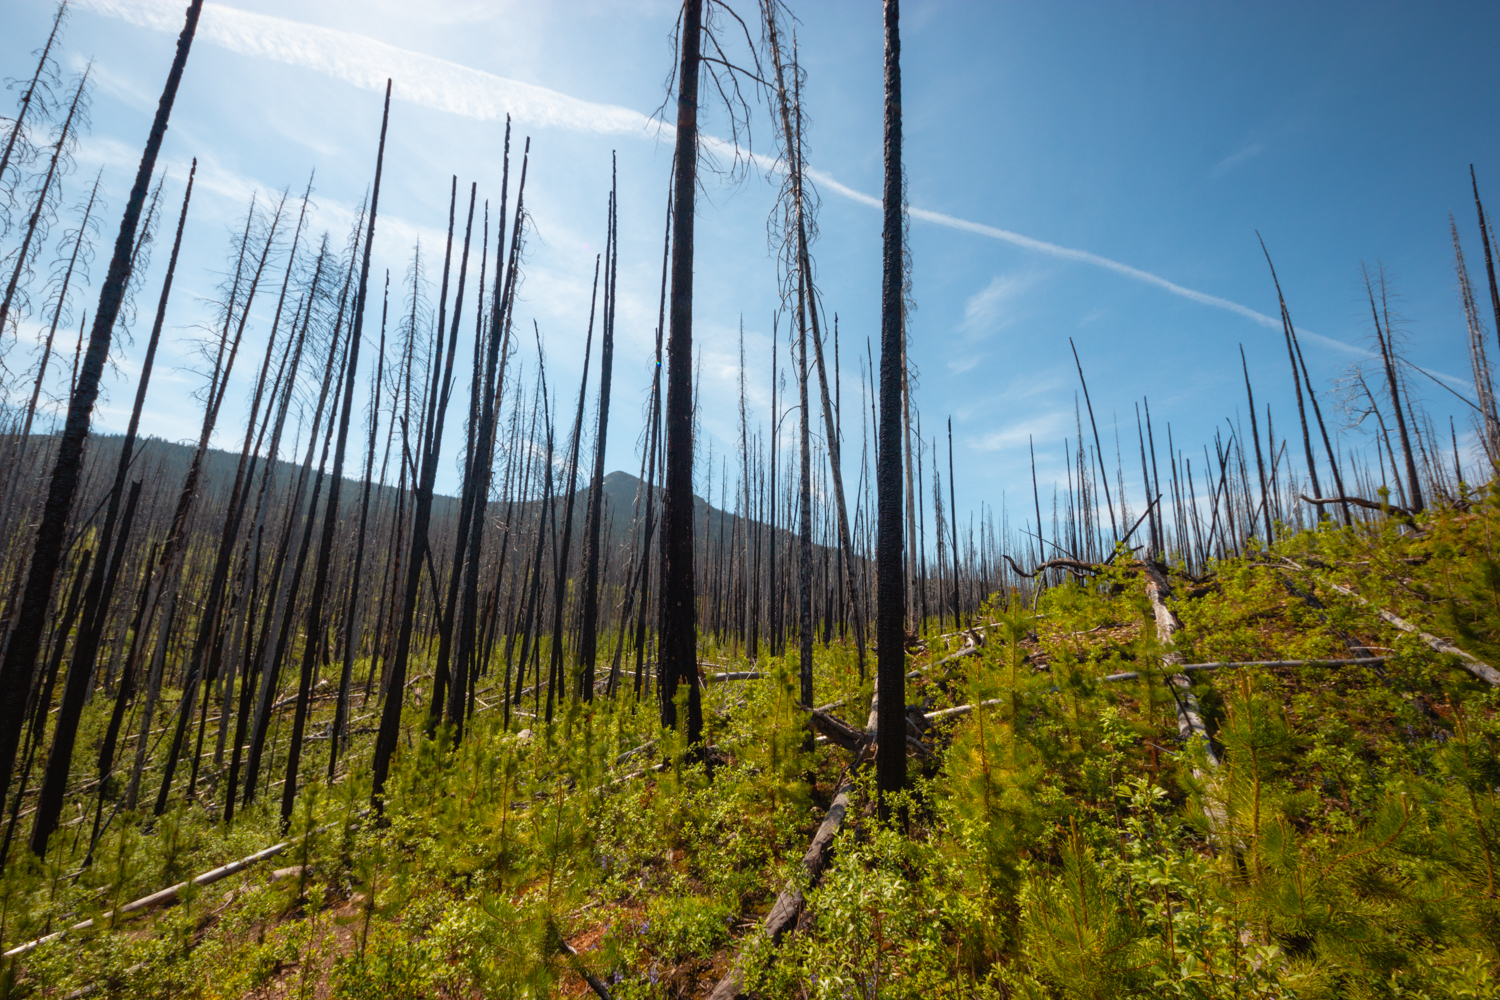 Burnt trees in a forest. The forest floor is covered in greenery with a bright blue sky.